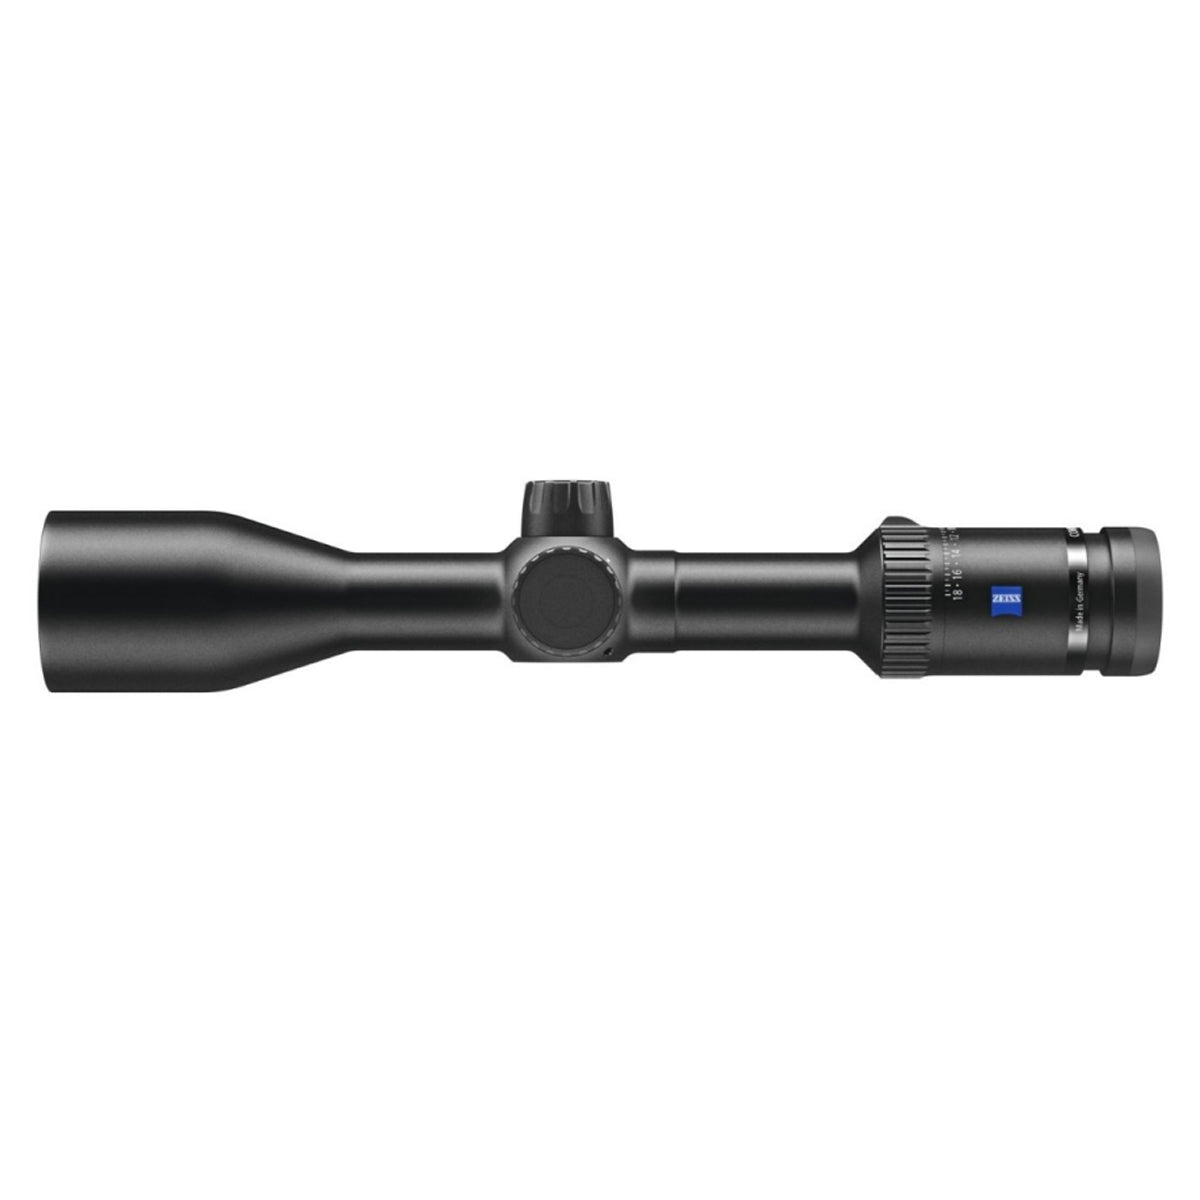 Zeiss Conquest V6 3-18x50 Riflescope in Zeiss Conquest V6 3-18x50 Riflescope by Zeiss | Optics - goHUNT Shop by GOHUNT | Zeiss - GOHUNT Shop